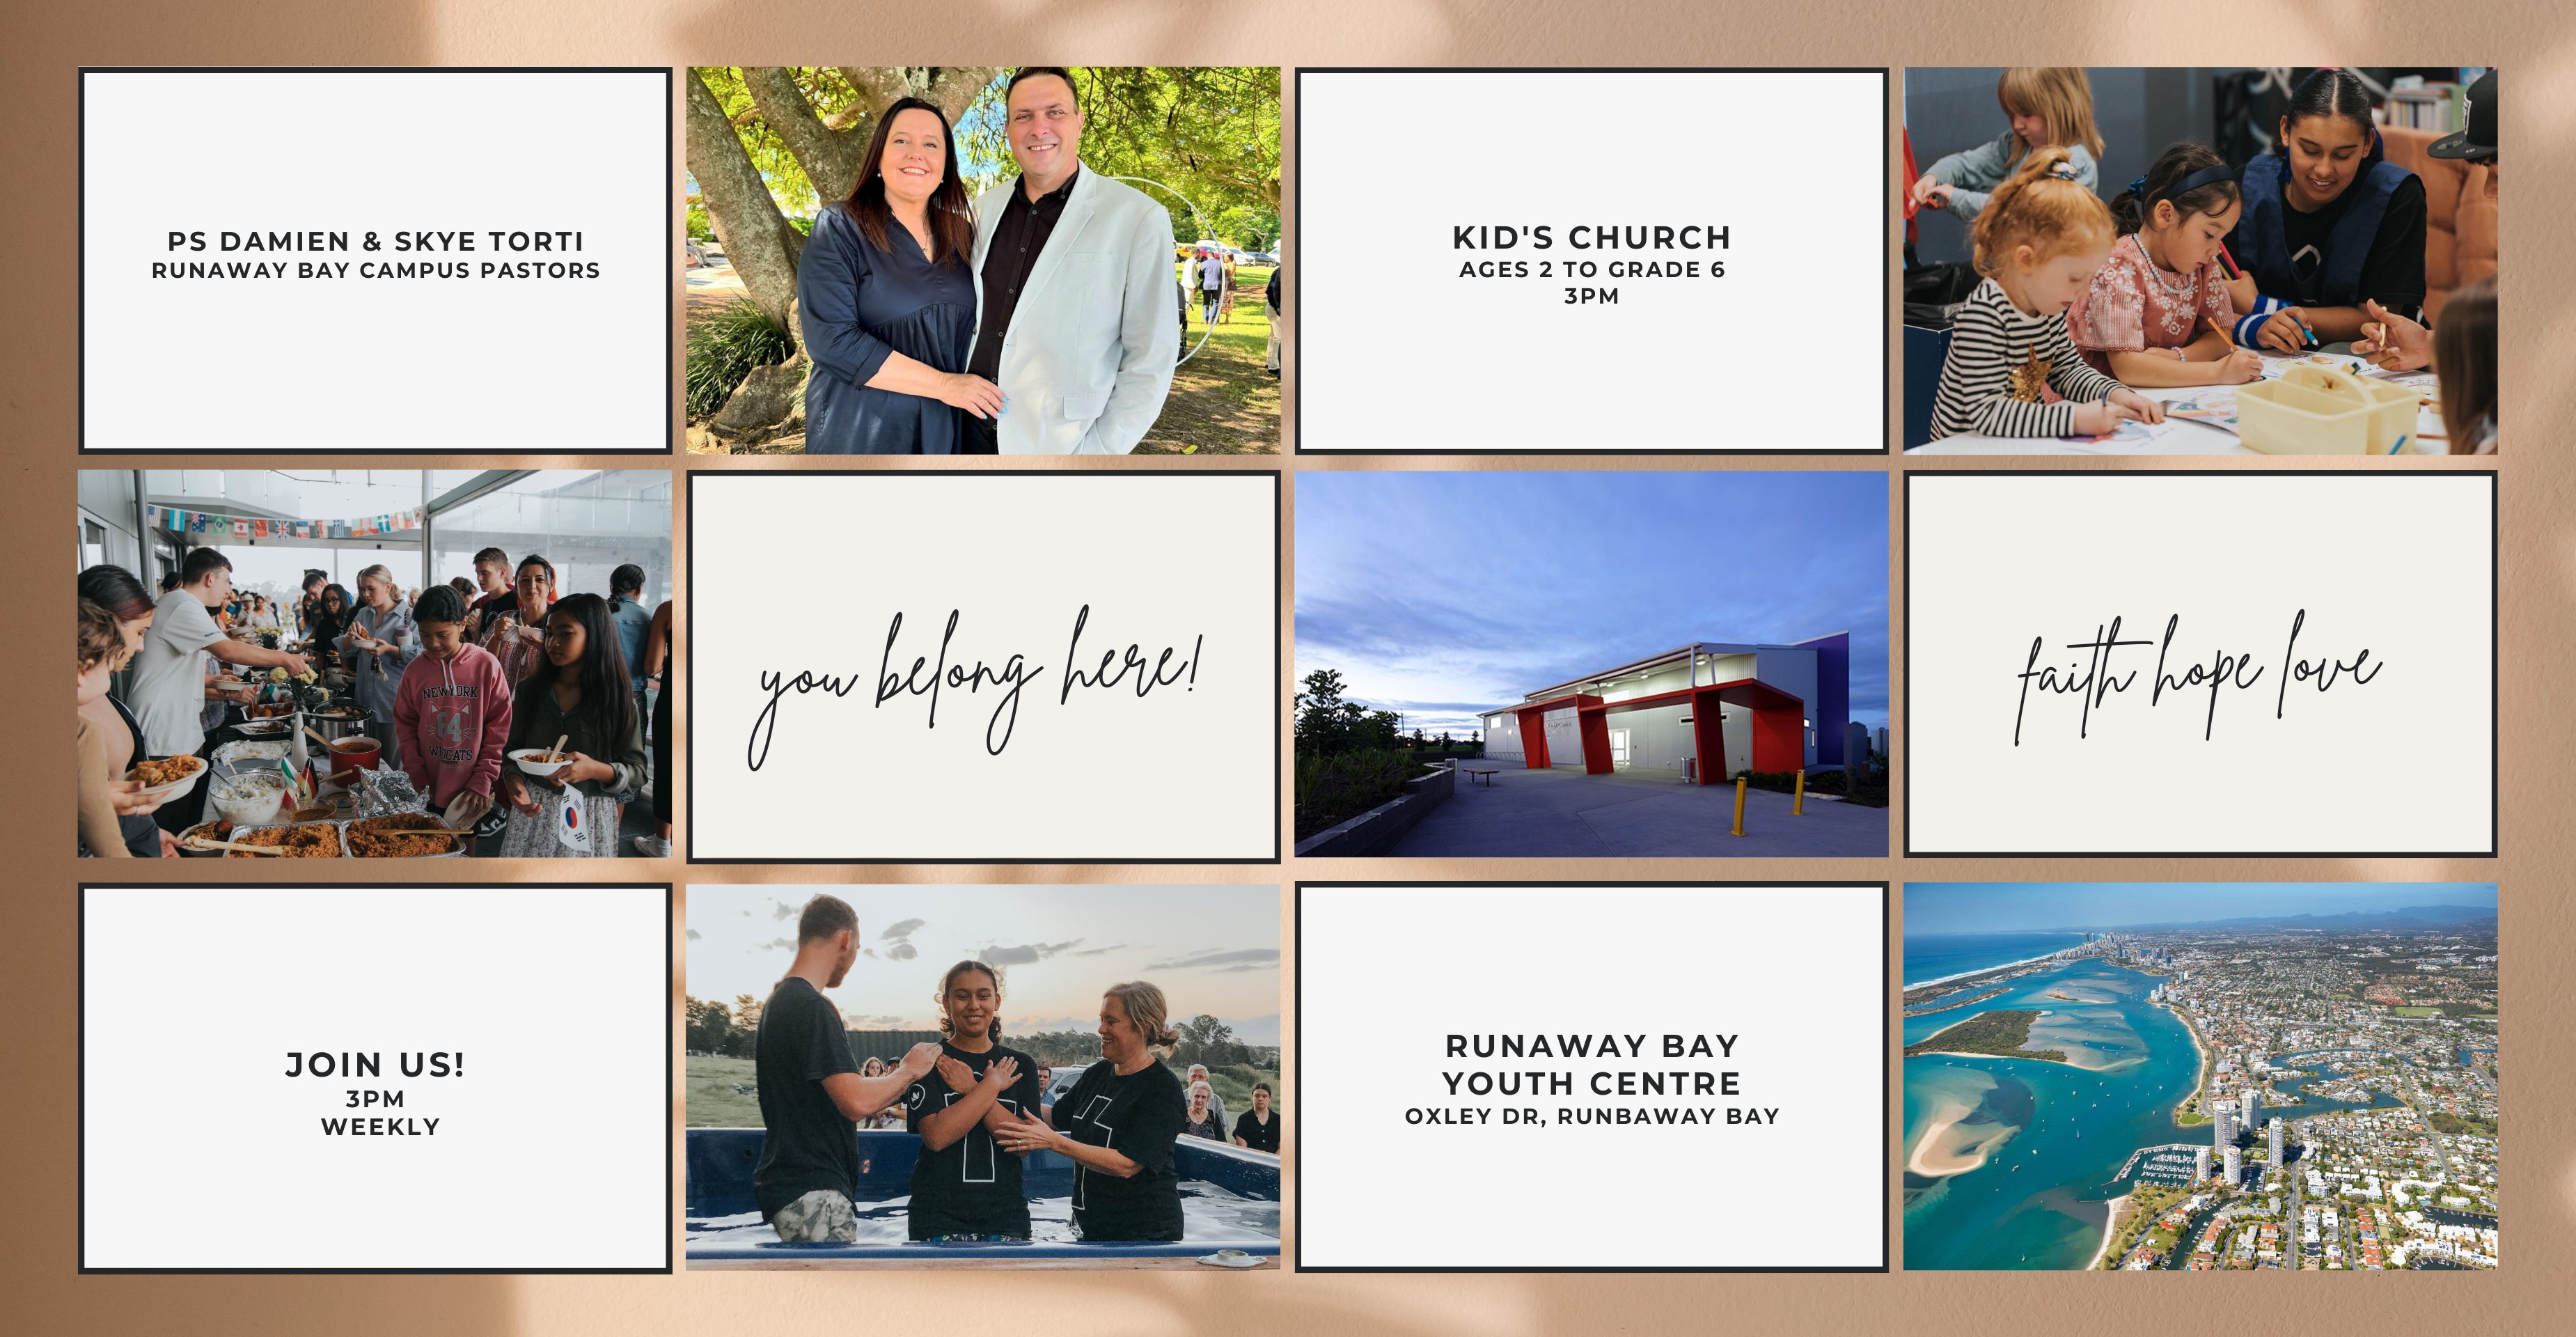 King's Church Runaway Bay Campus picture showcasing who we are, how we engage our community and introducing our pastors, Damien and Skye